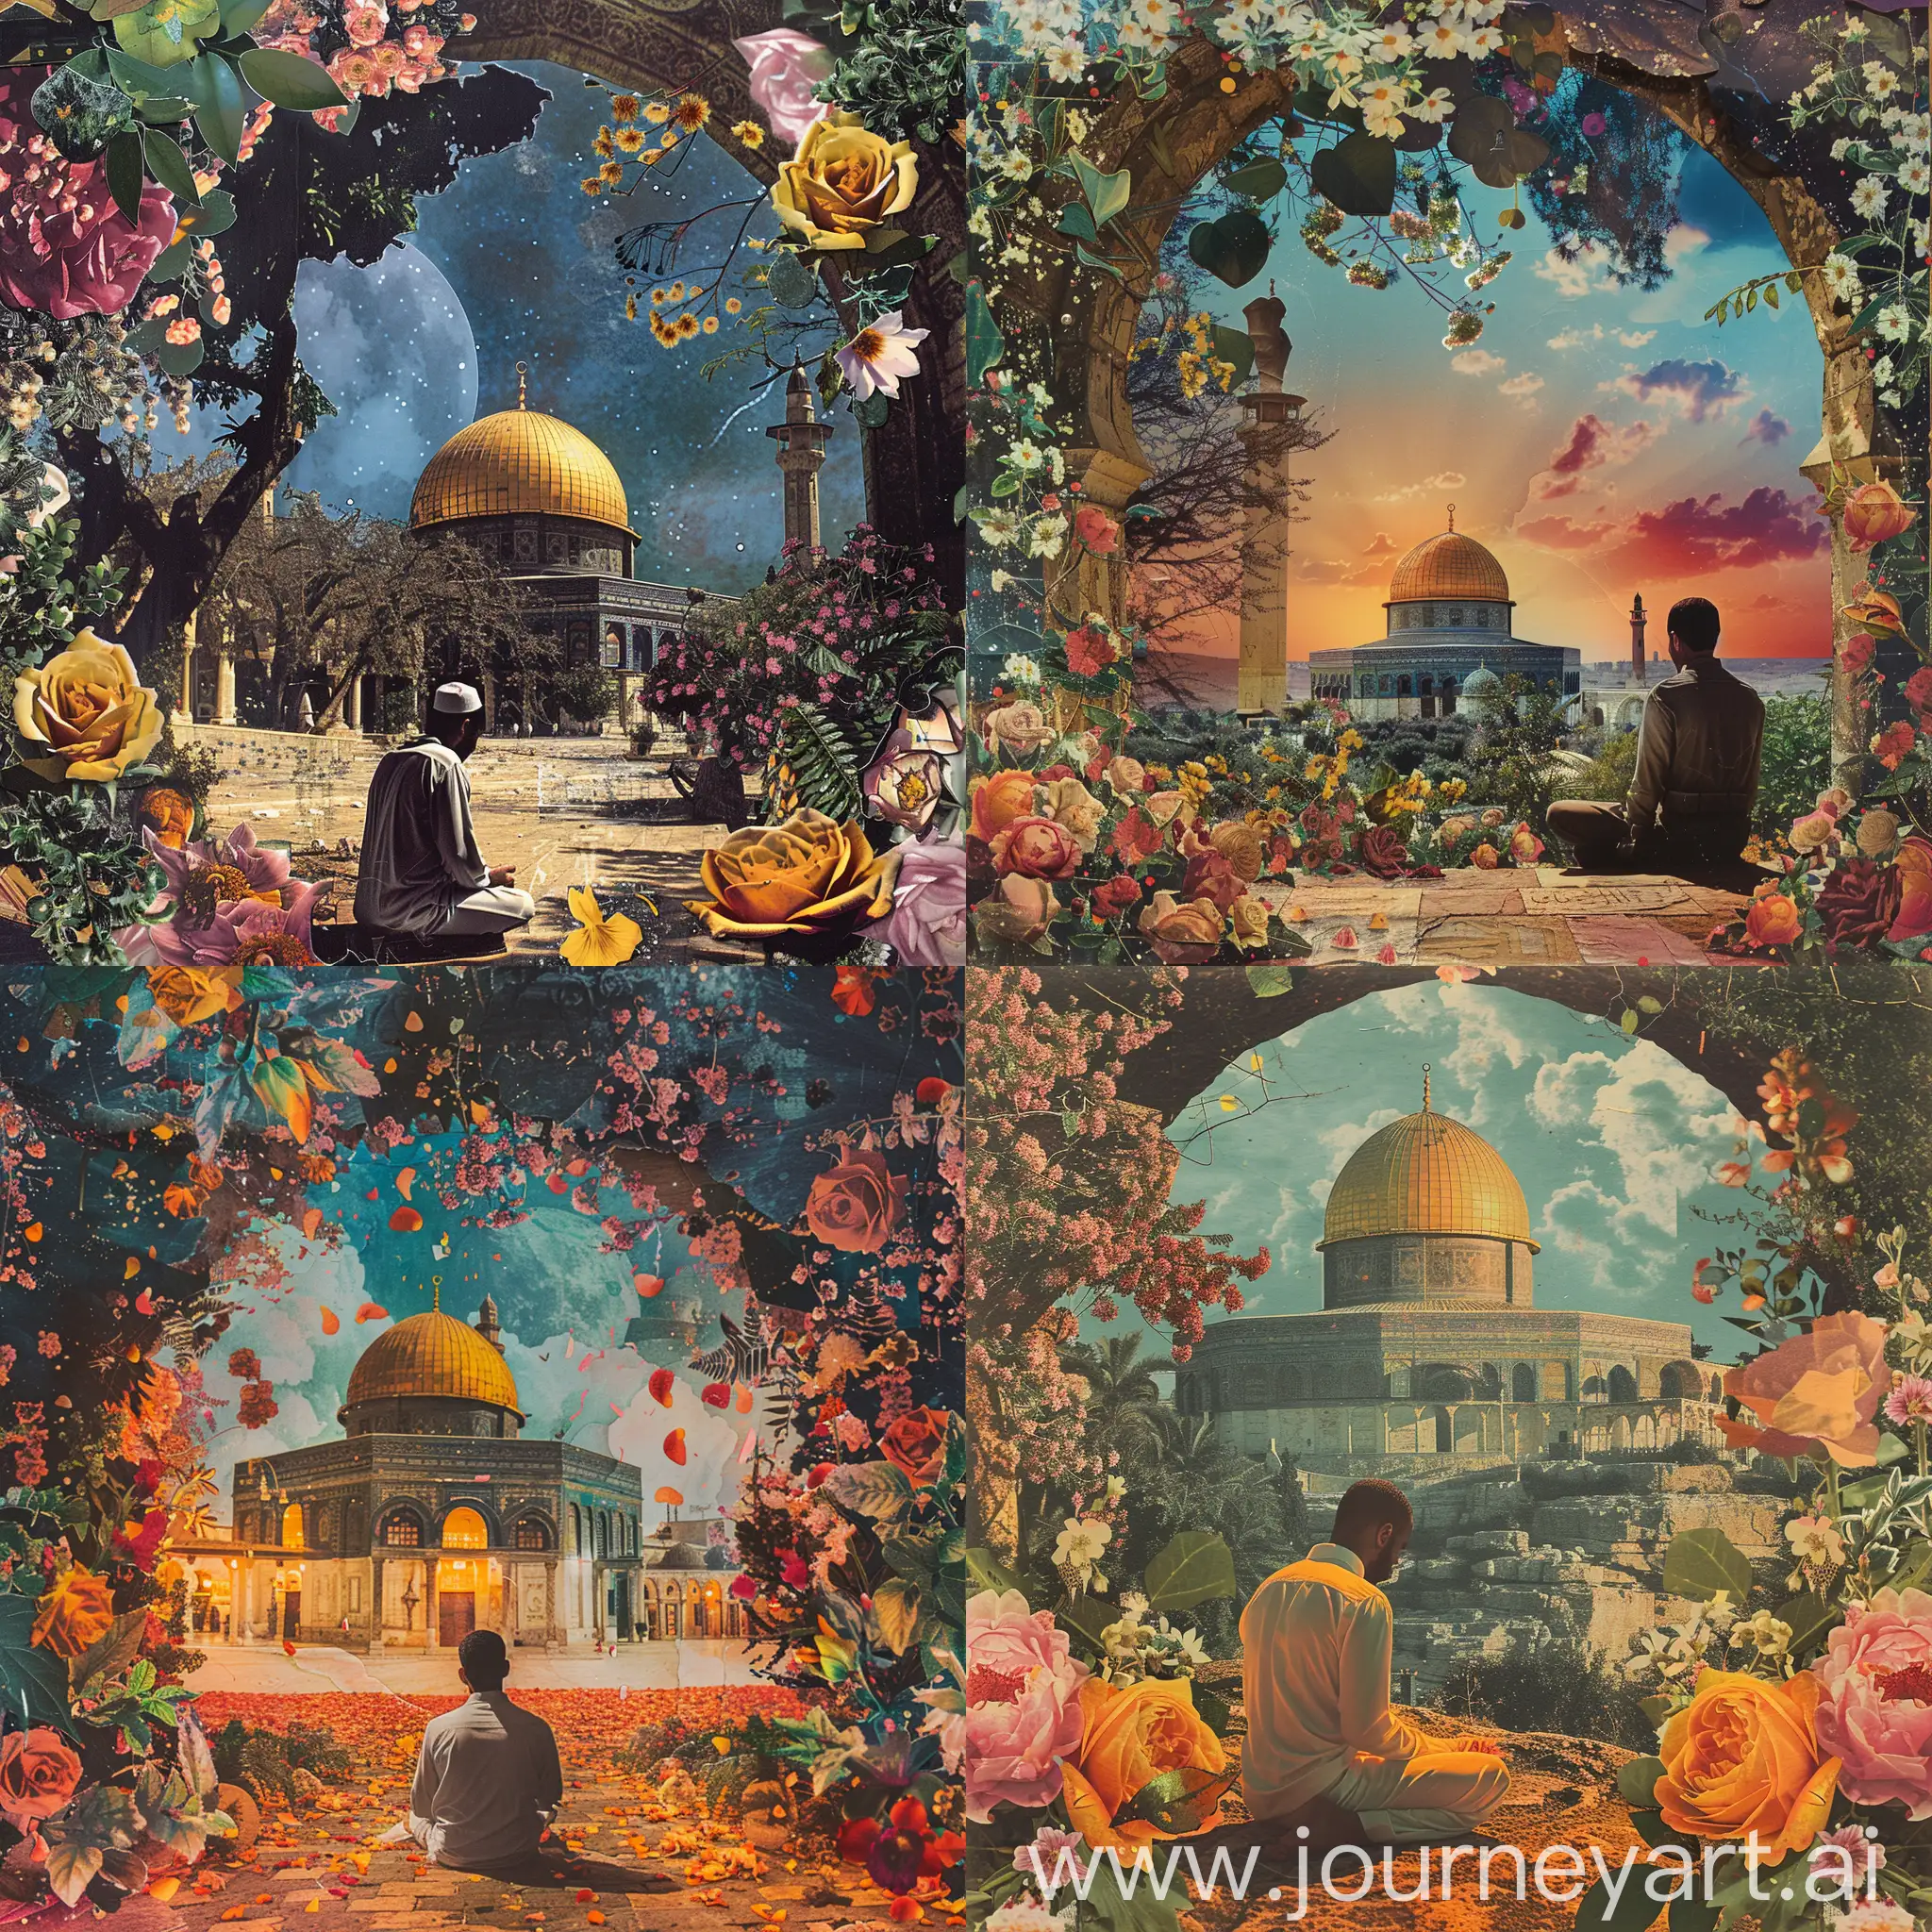 arafed collage of images of A man prays at the mosque on the in a flower arrangement ,dome of the rock mosque ,night of Ramadan,
 collage artwork, collage art, contemporary collage,
 a contemporary artistic collage,  photoshop collage,
 a contemporary artistic collage, contemporary collage,
 surreal collage, courful illustration, collage artwork,
 by Lubin Baugin, collage art, a collage, ( collage ),
 made of flowers and leaves, digital collage, inspired 
by Lubin Baugin, surreal illustration, a beautiful 
artwork illustration, collages